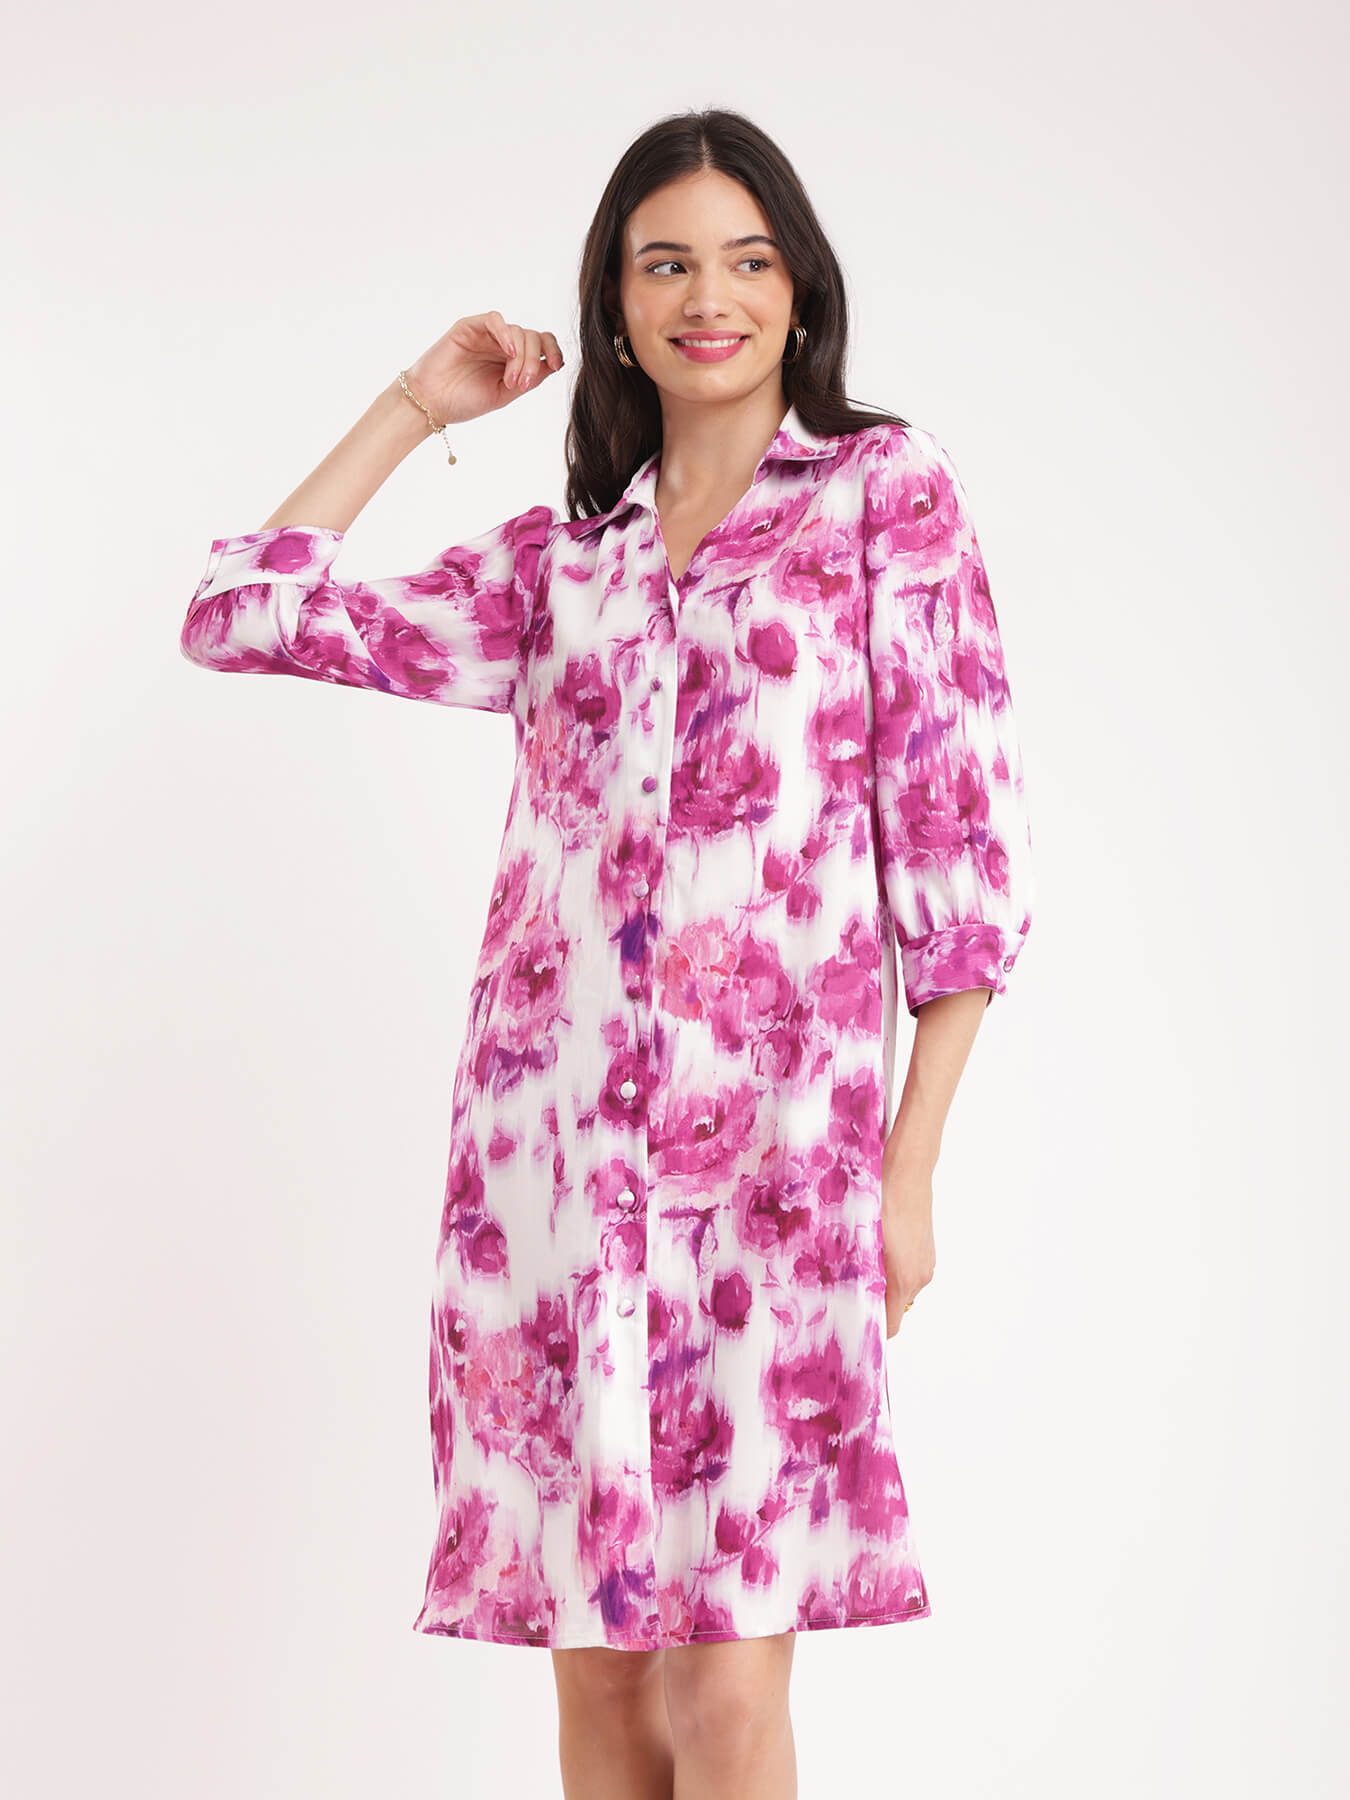 Floral Shirt Dress - Pink And White